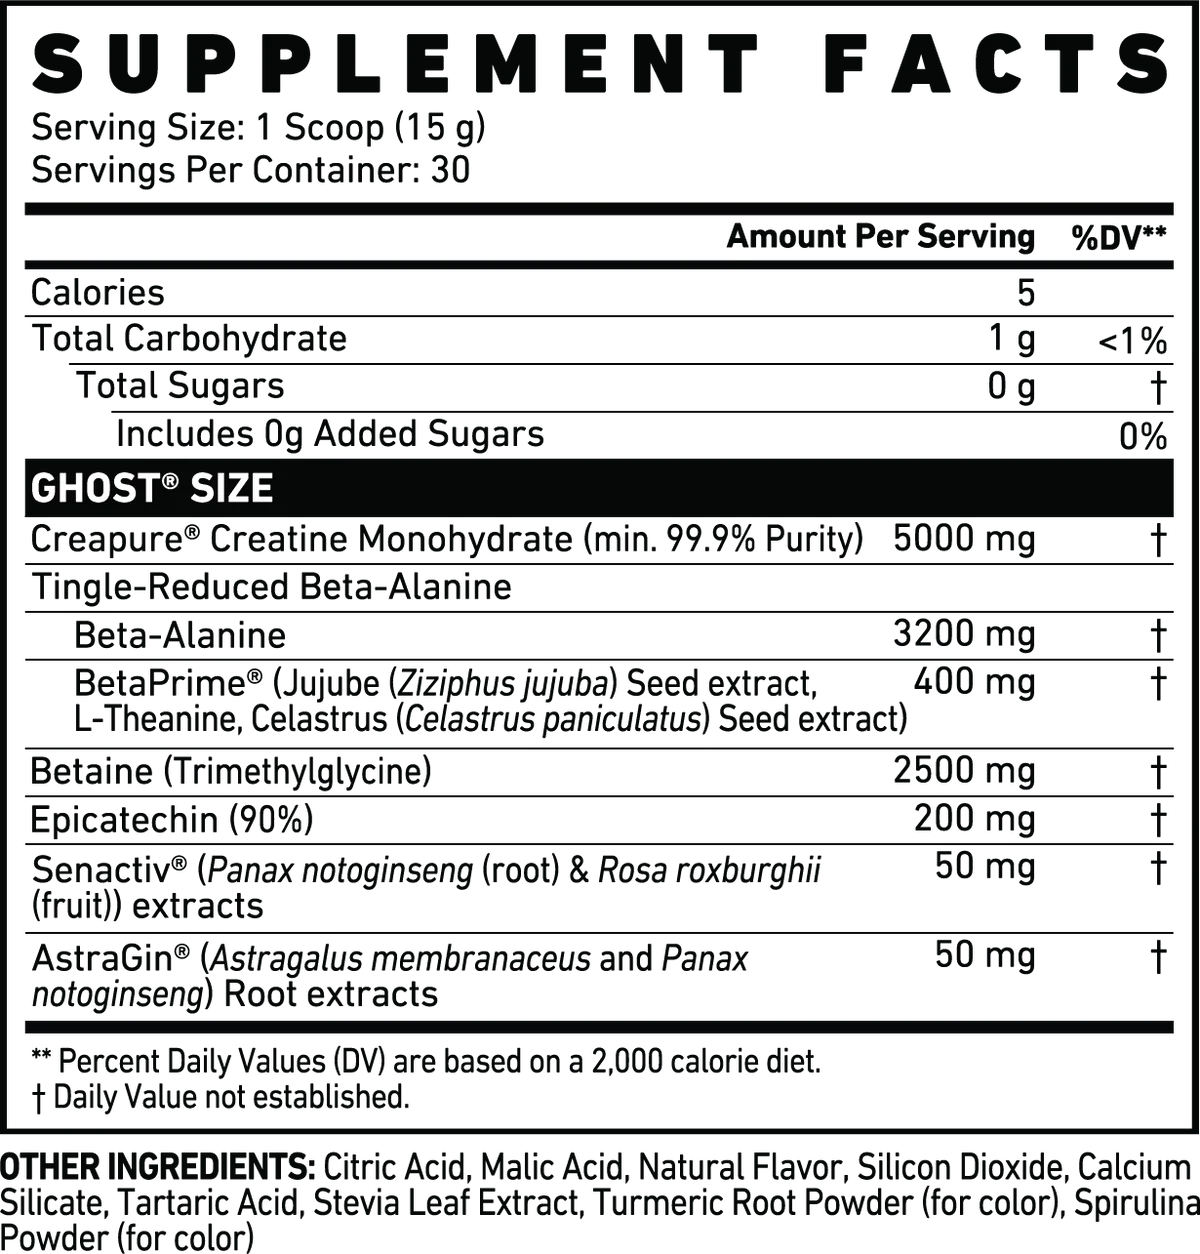 Ghost - Size V2 Creatine Muscle Builder  - 30 serving